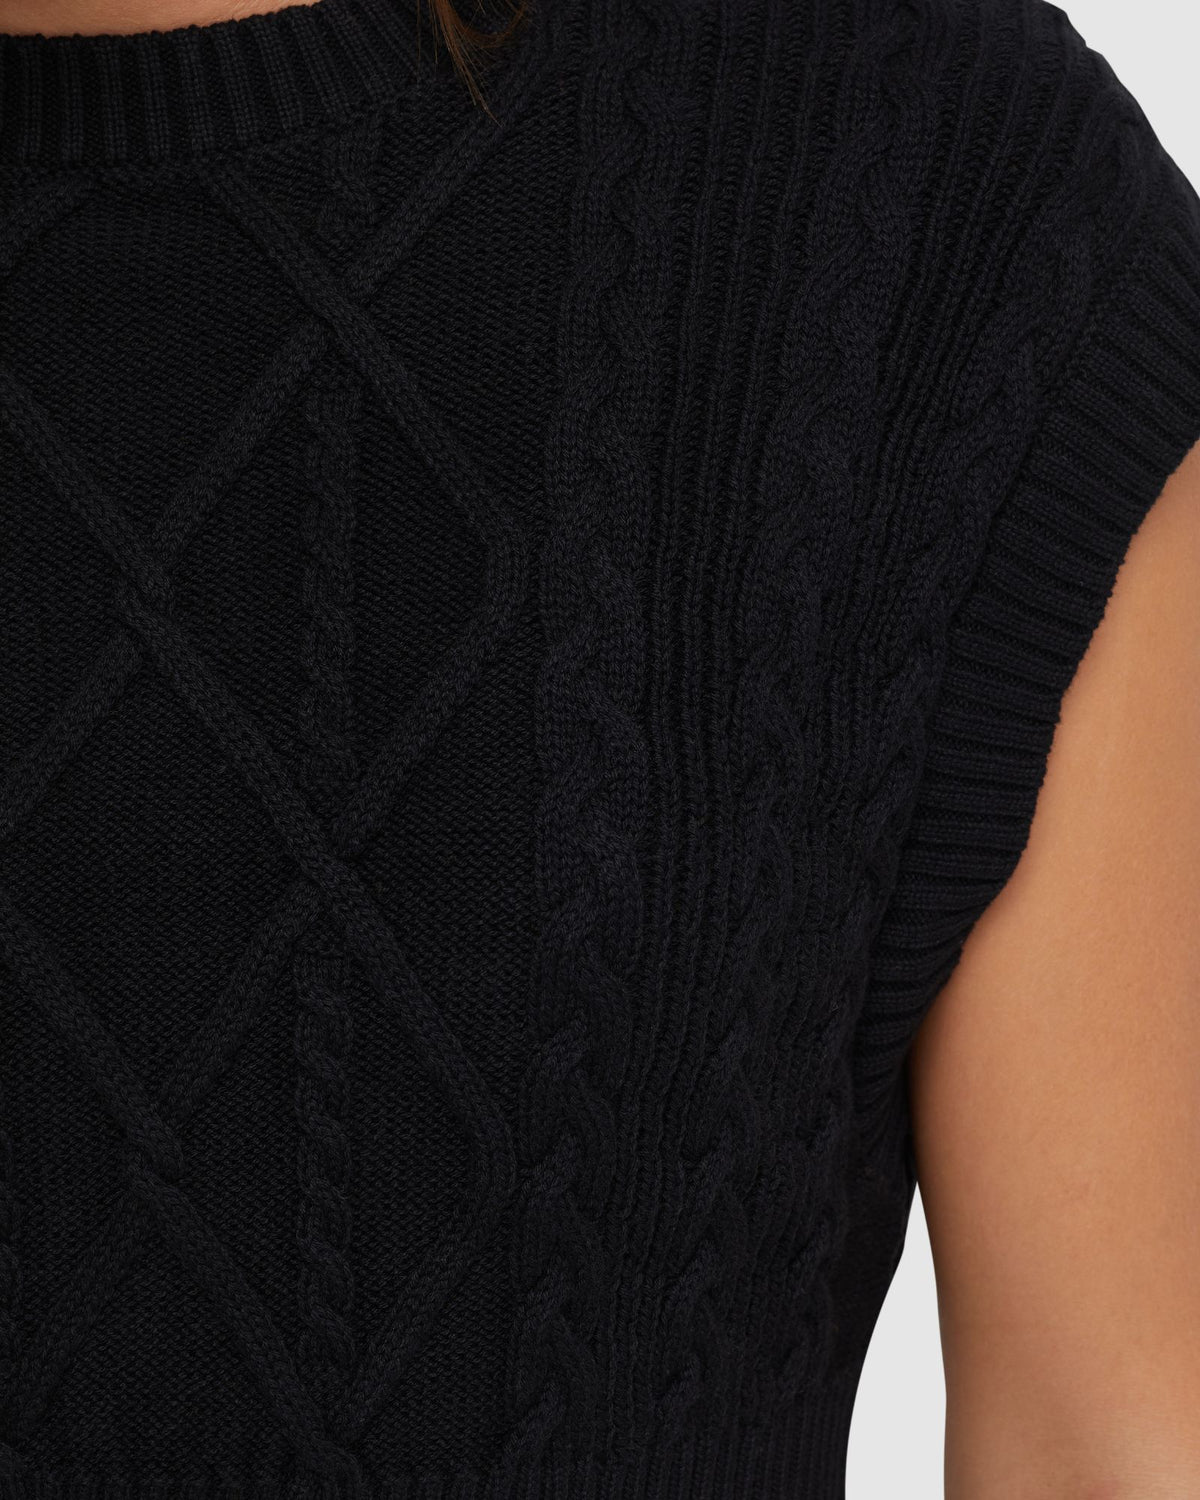 CARLY CABLE KNIT VEST WOMENS KNITWEAR